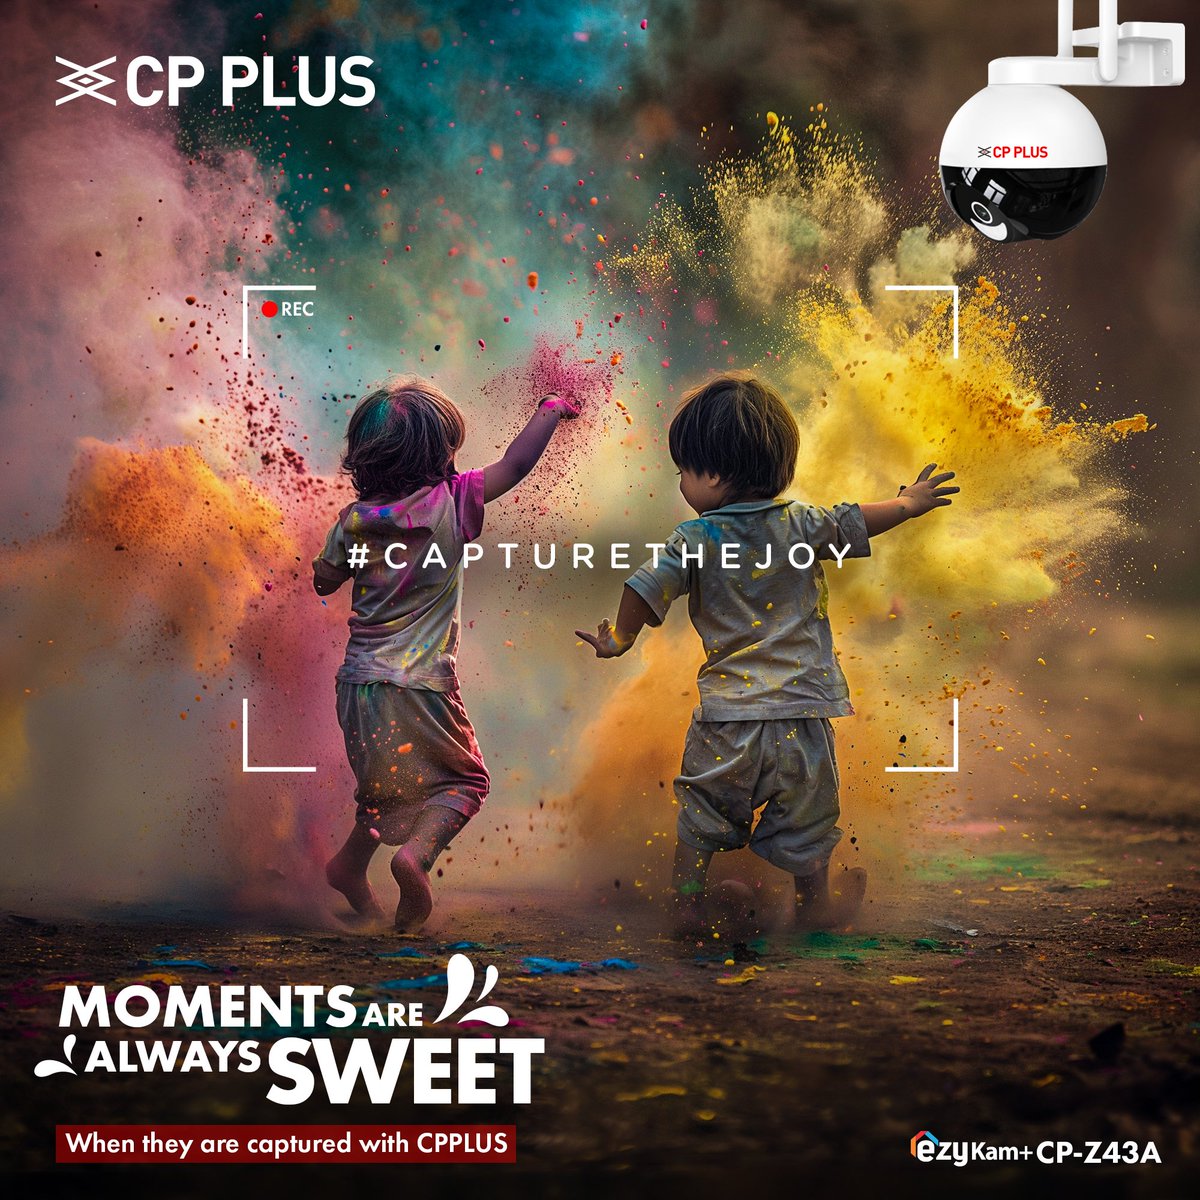 With CP PLUS, you can capture these fleeting moments in stunning detail. Every smile, splash, and giggle is preserved for you to relive the magic. #CPPLUS #CPPLUSIndia #SafeHoli #CPPLUSHoli #SecuritySolutions